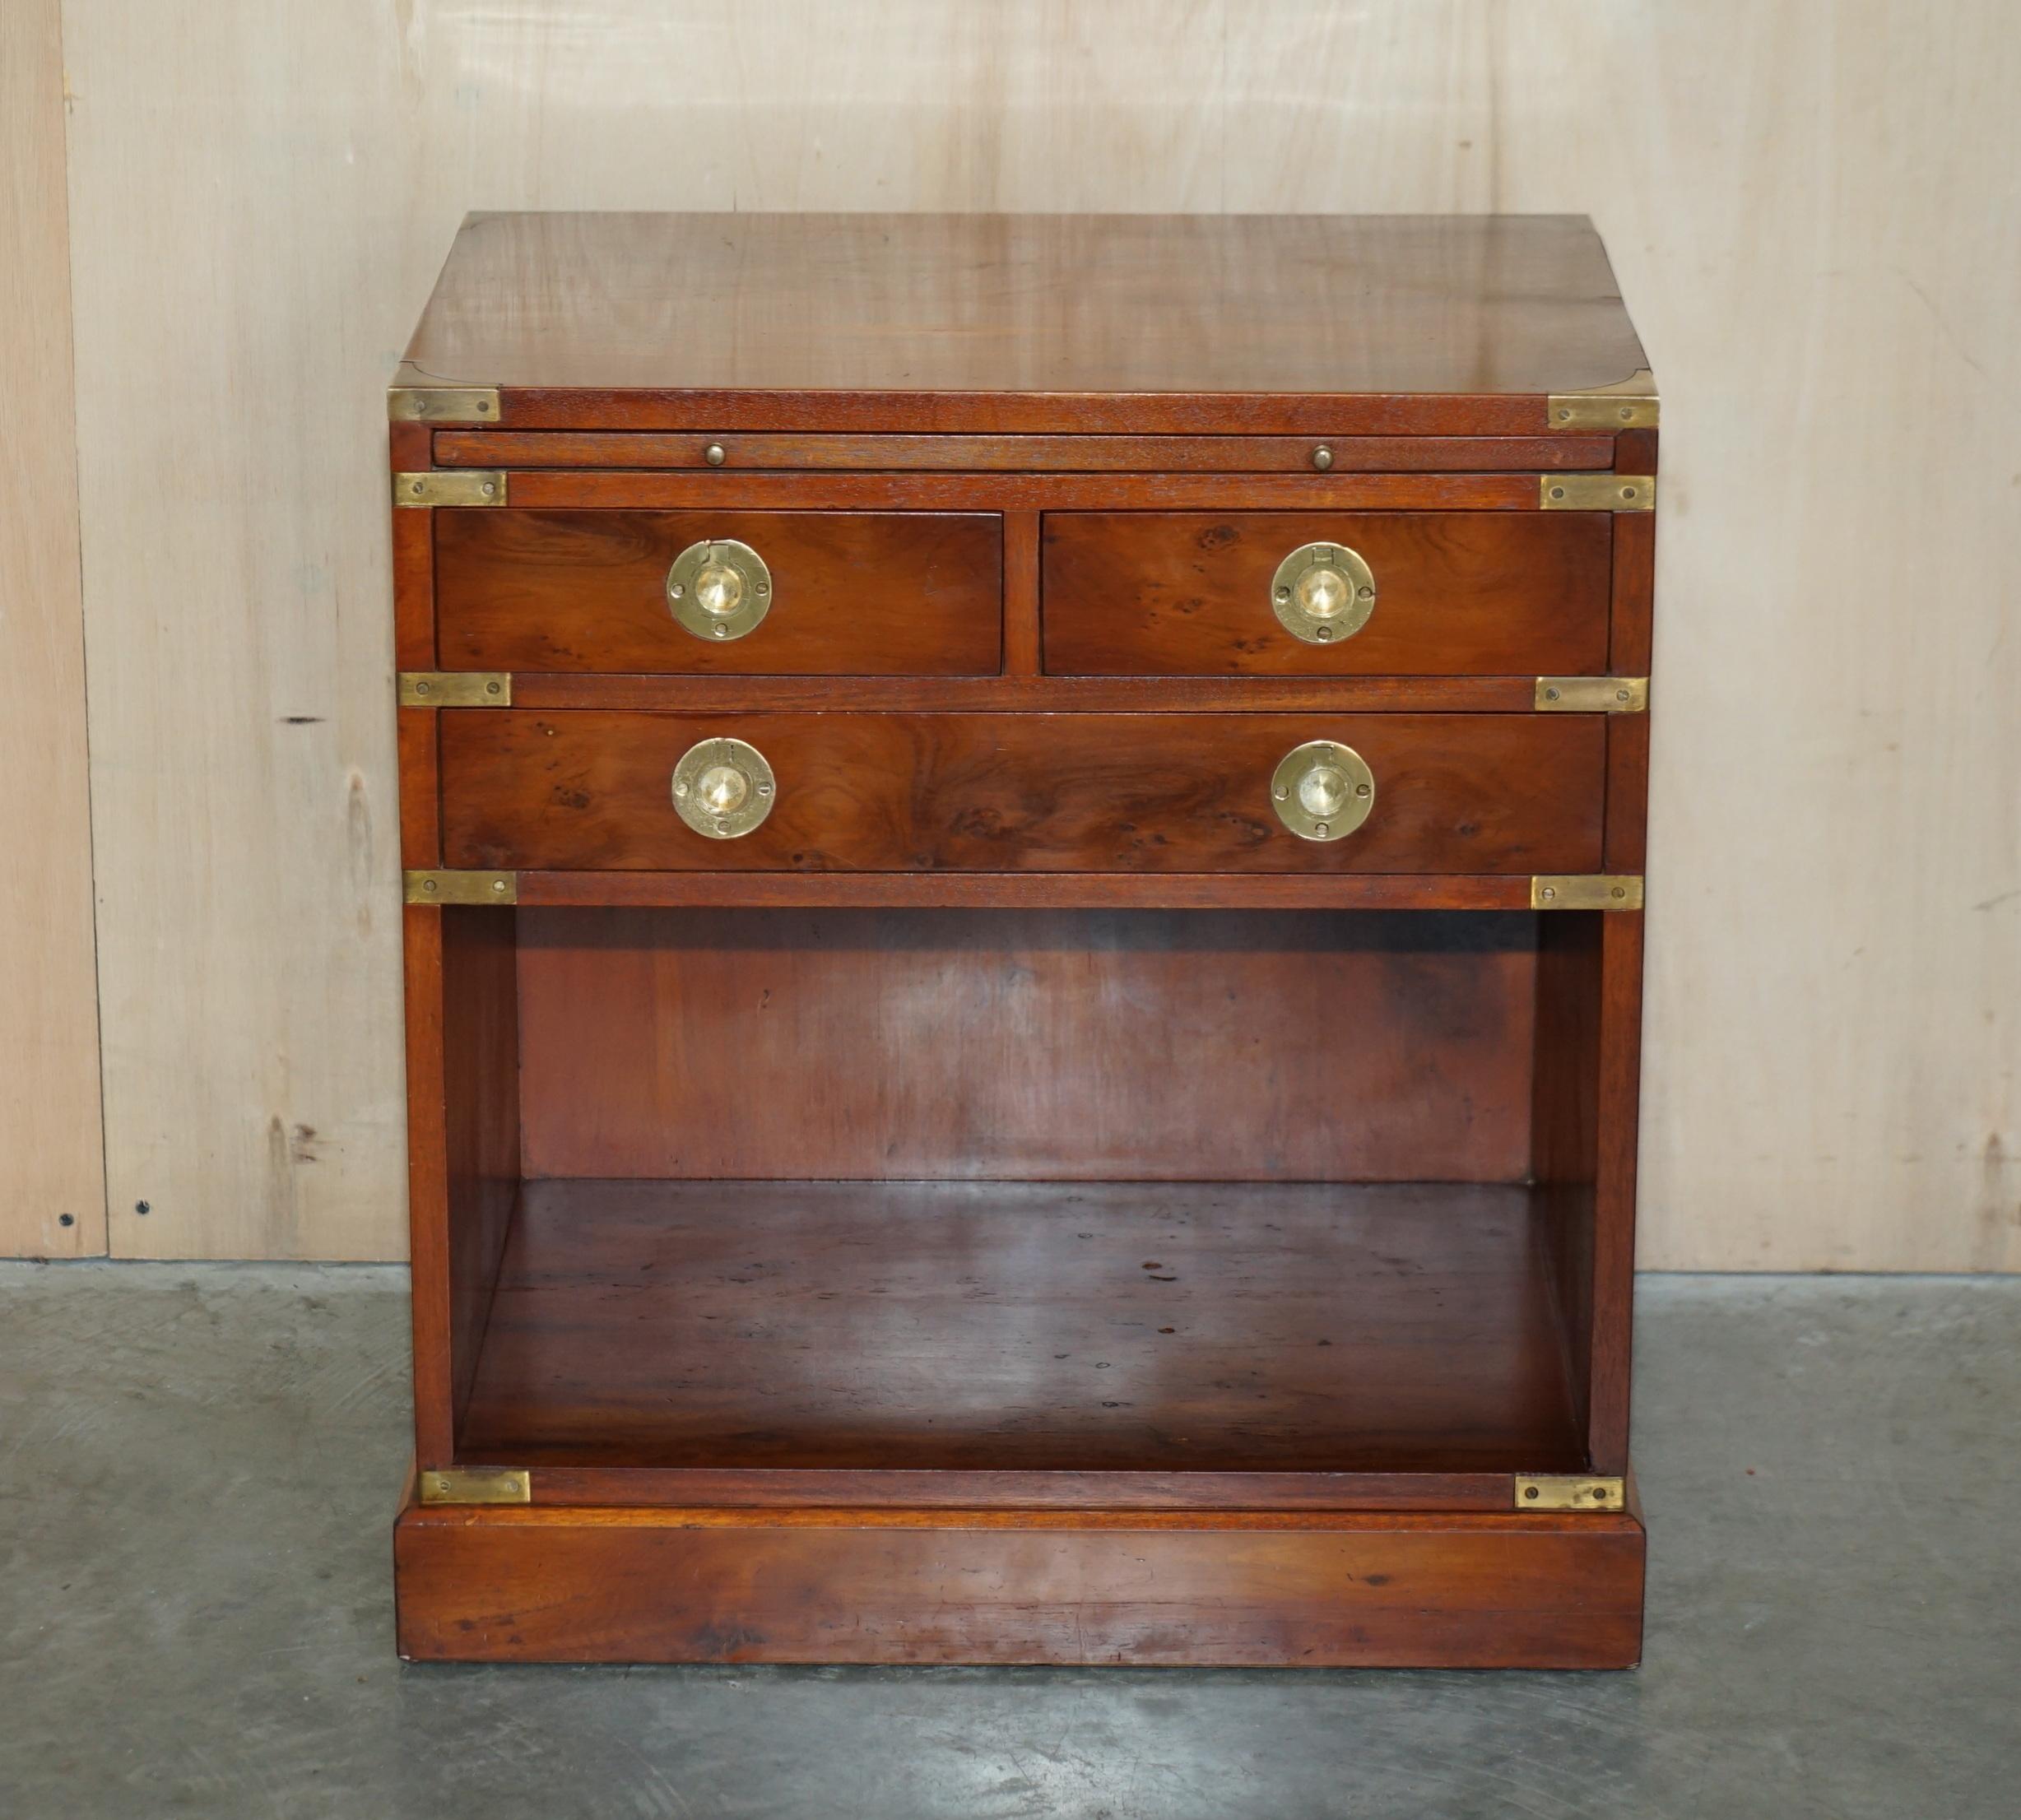 We are delighted to offer for sale this sublime vintage Burr Yew wood Bachelors chest with butlers serving tray and Military Campaign drawers

A truly stunning and well made piece, this is a bachelor chest which has a slip butlers serving tray, the